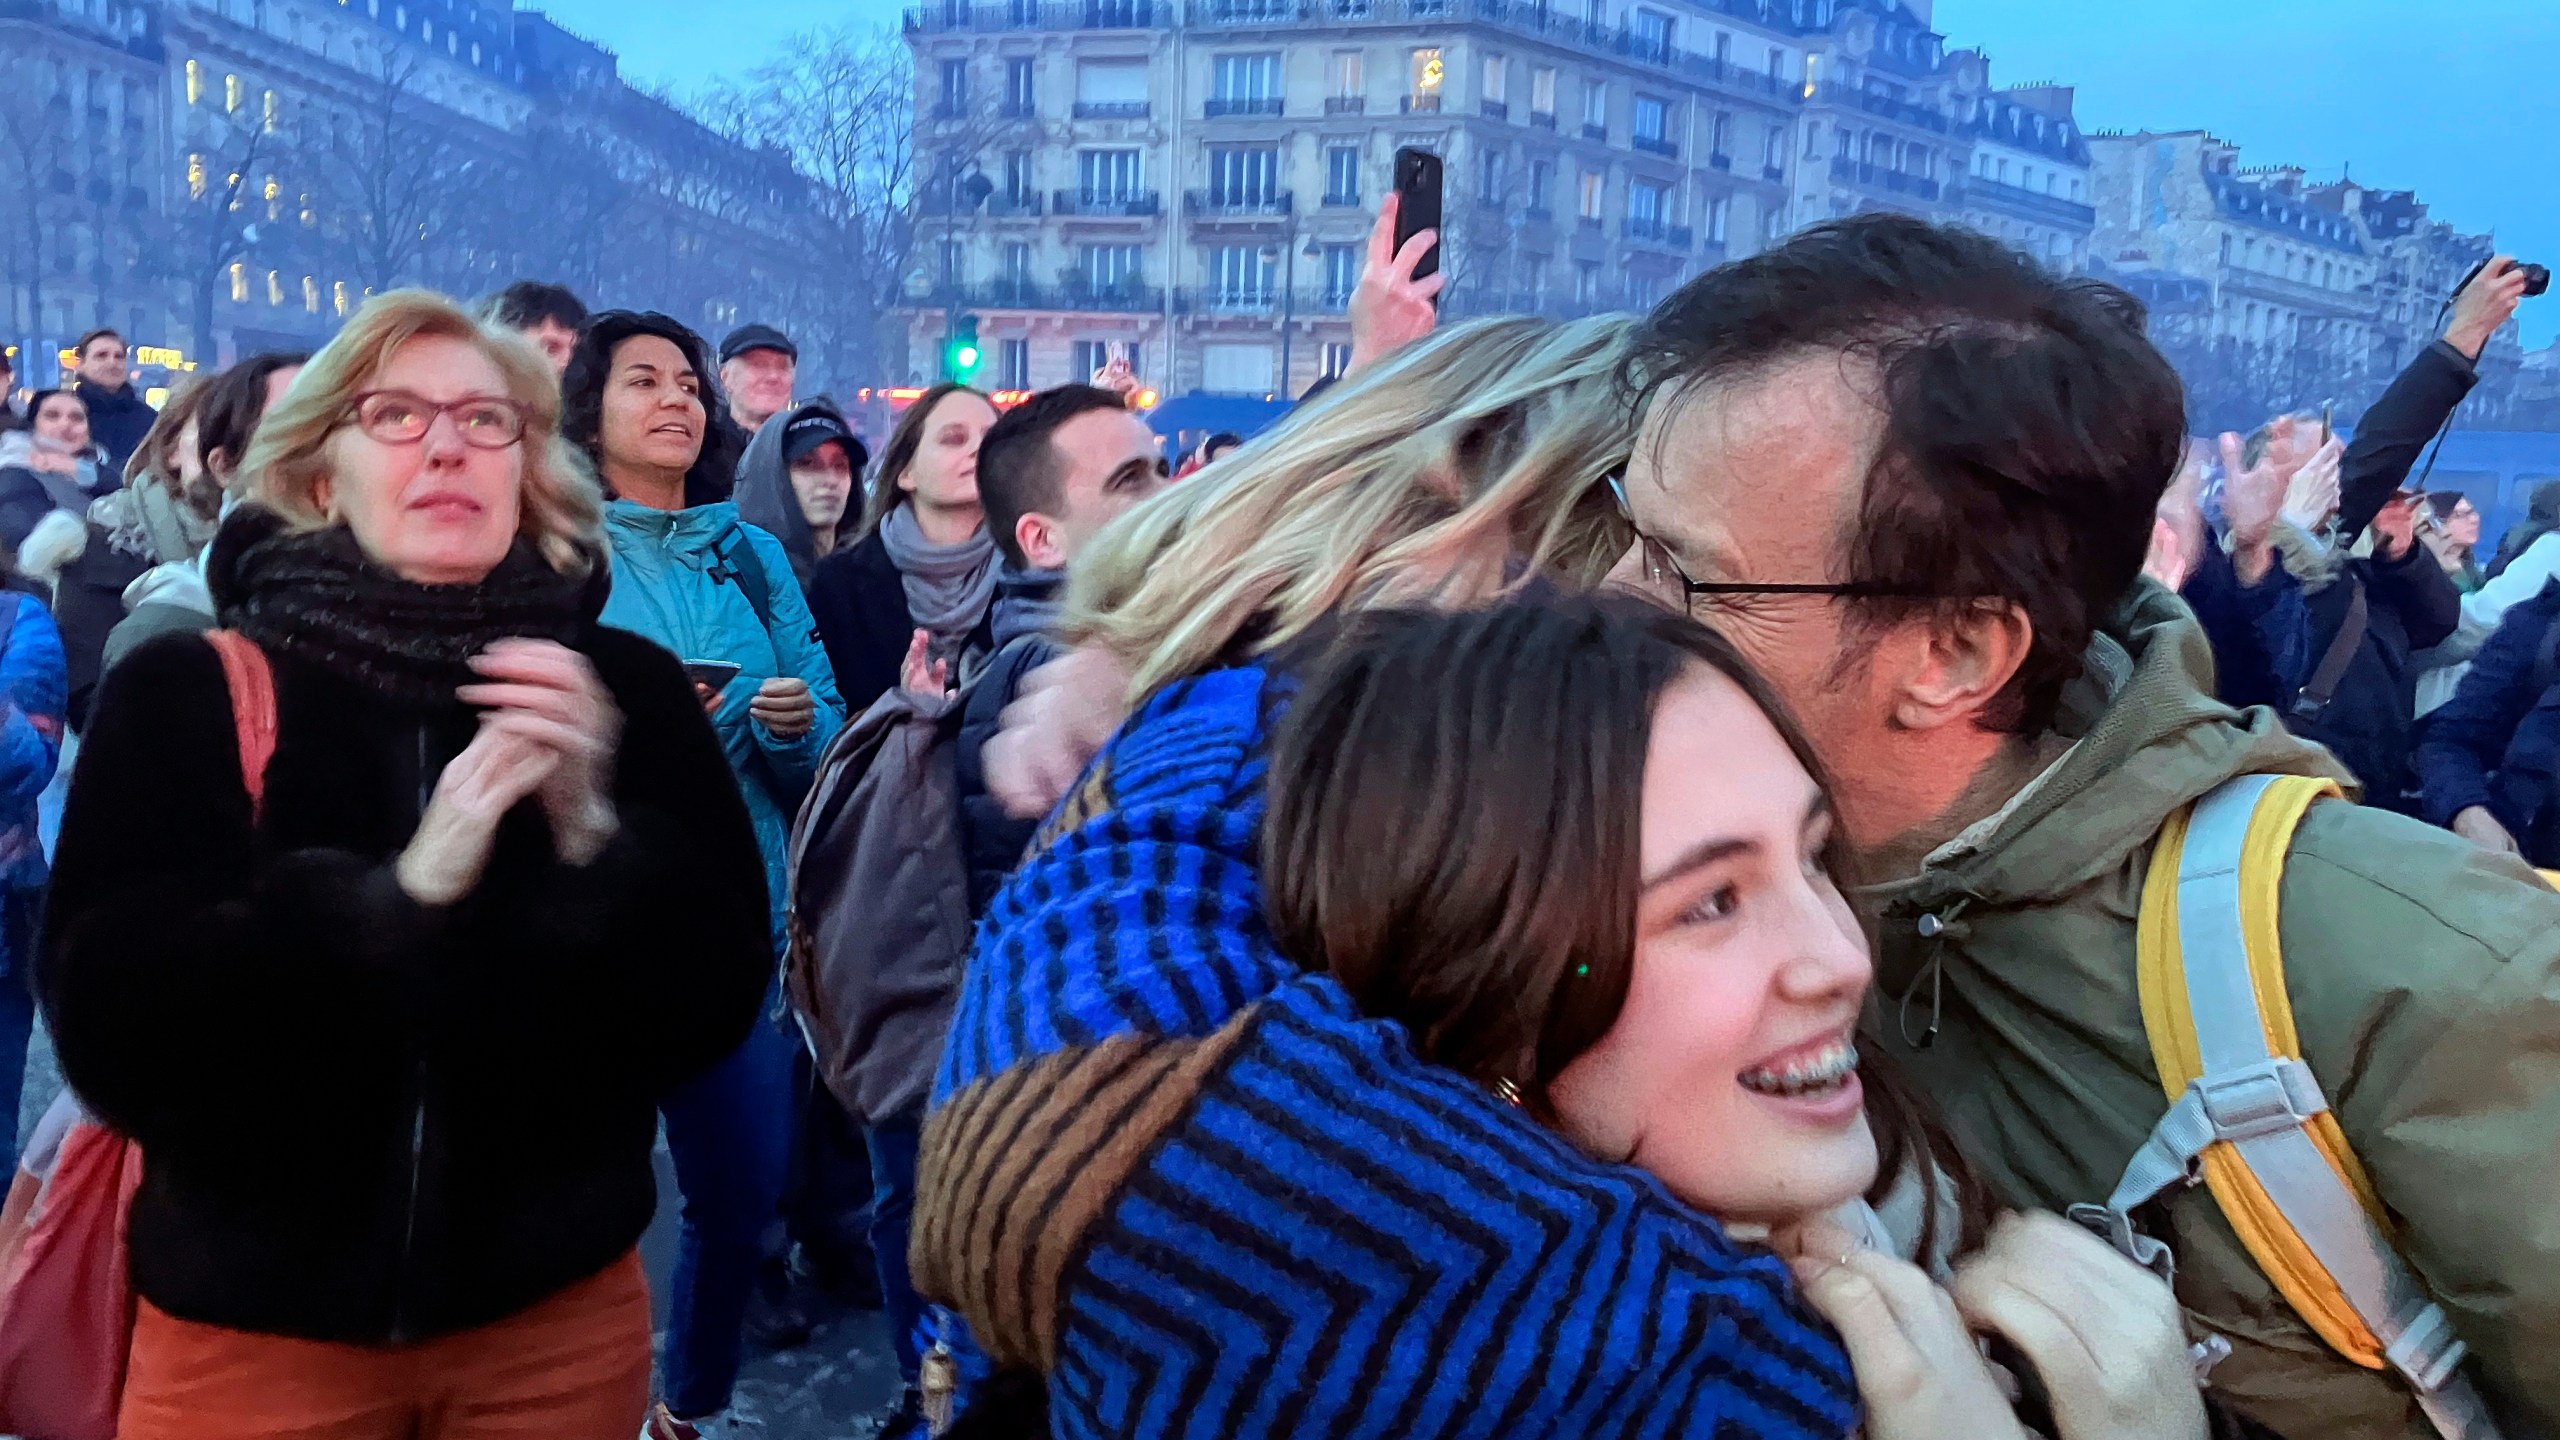 Pro-abortion supporters hug each other after French lawmakers have approved a bill that will enshrine a woman’s right to an abortion in the French Constitution, at Trocadero Plaza in Paris, Monday, March 4, 2024. The vote makes France the first country to have a constitutional right to abortion since the former Yugoslavia inscribed it in its 1974 constitution. (AP Photo/Oleg Cetinic)